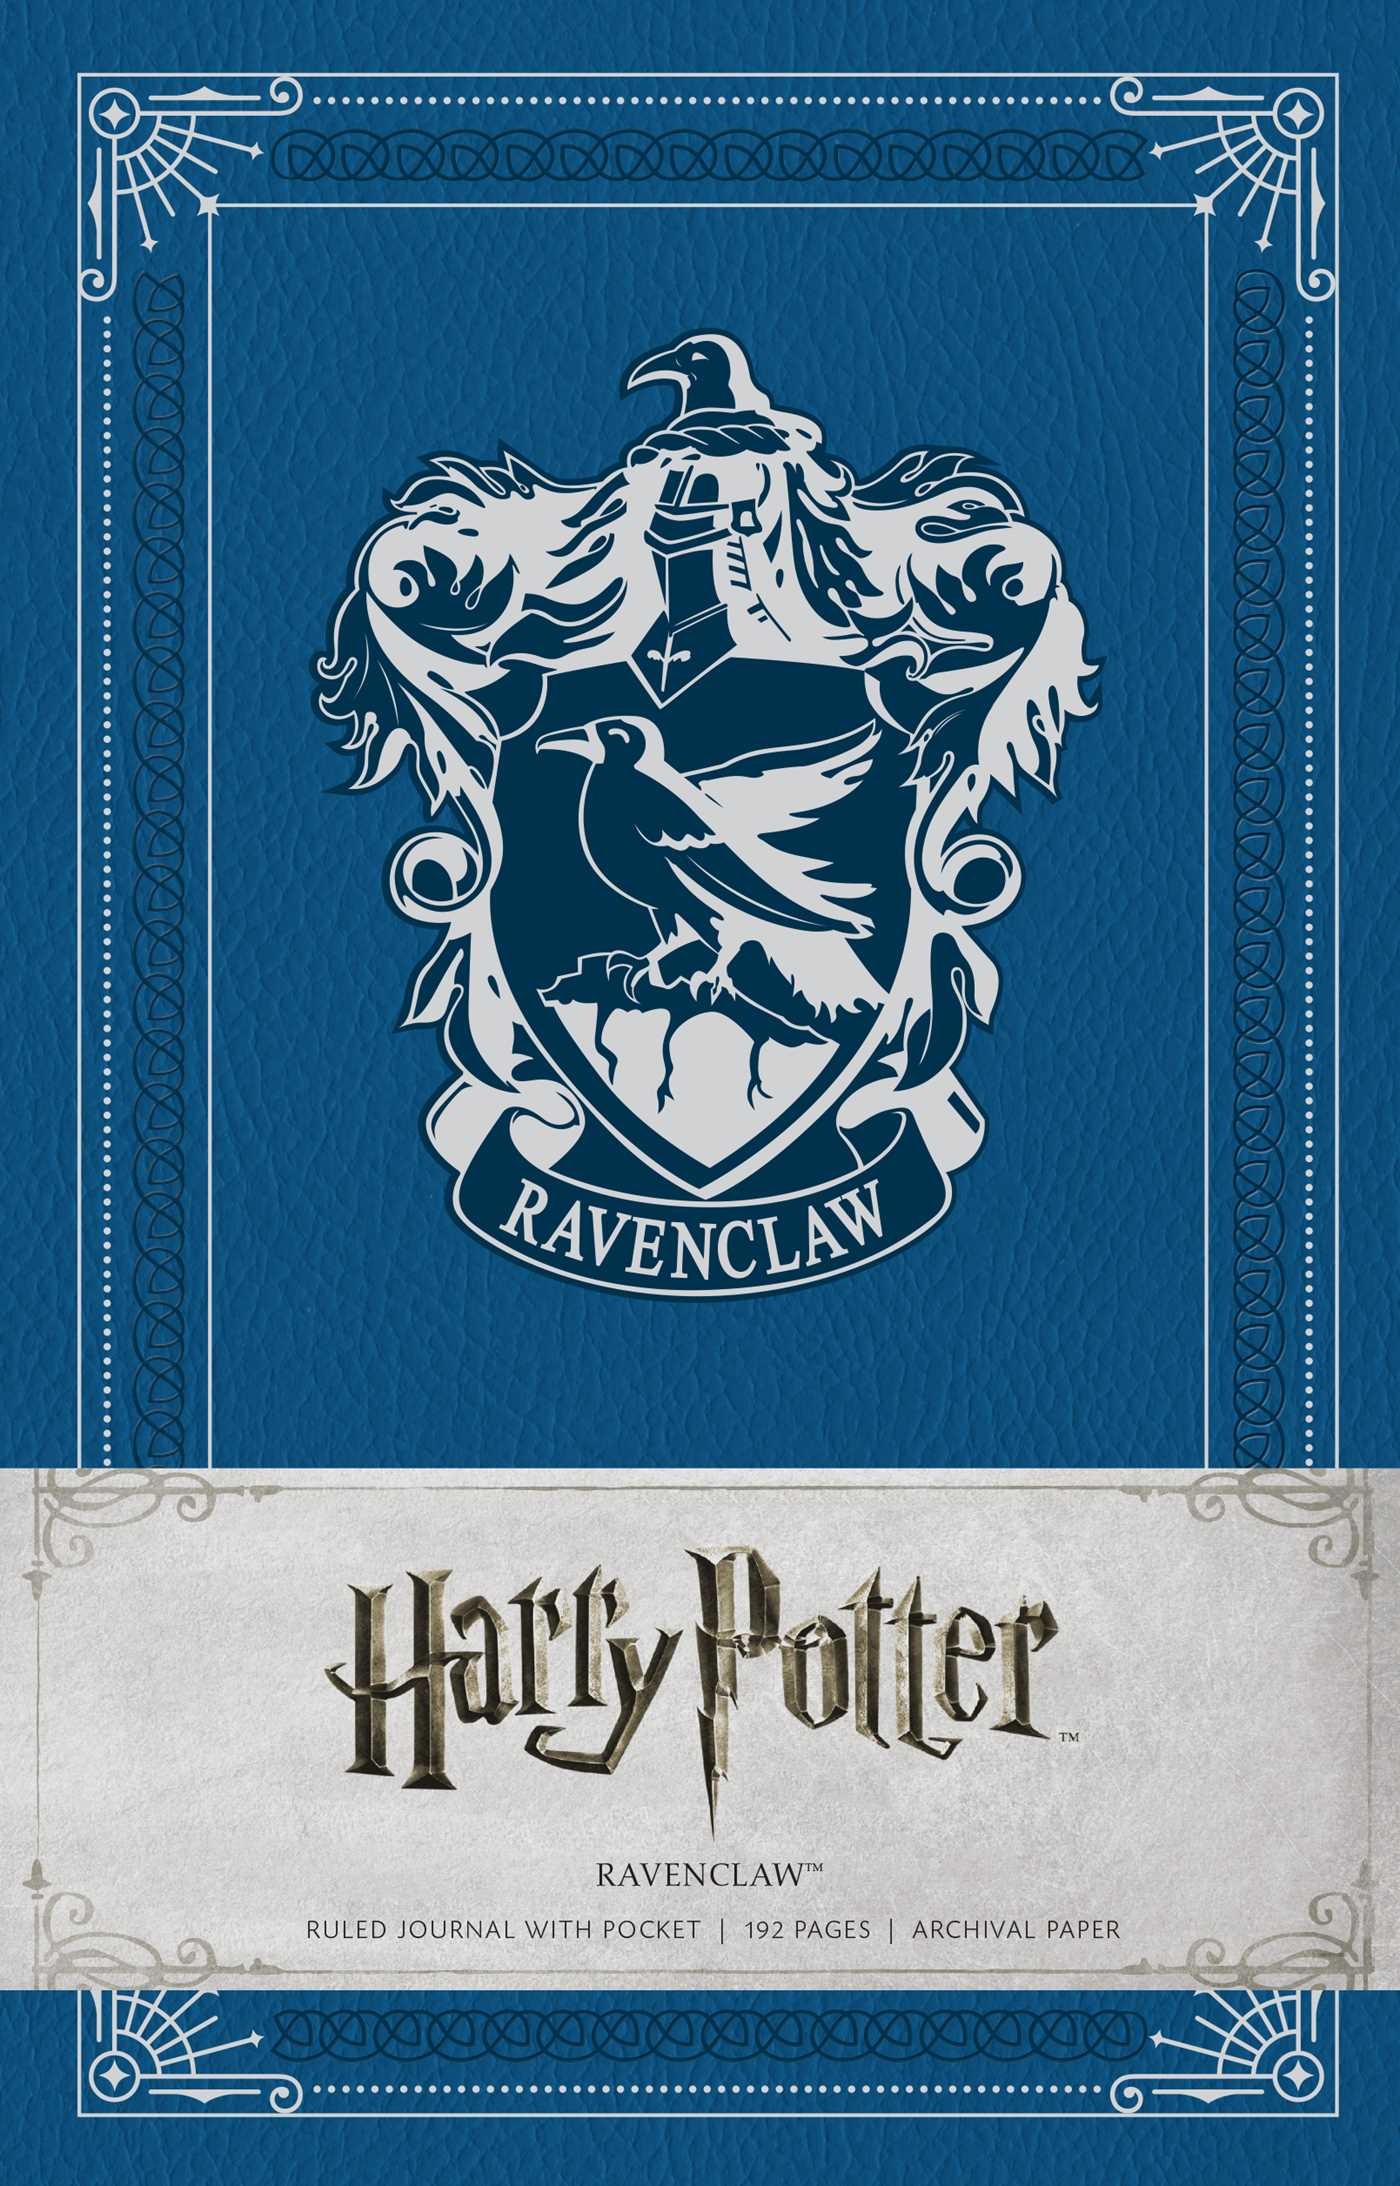 1400x2186 Harry potter ravenclaw hardcover ruled journal 9781608879496 hr ...